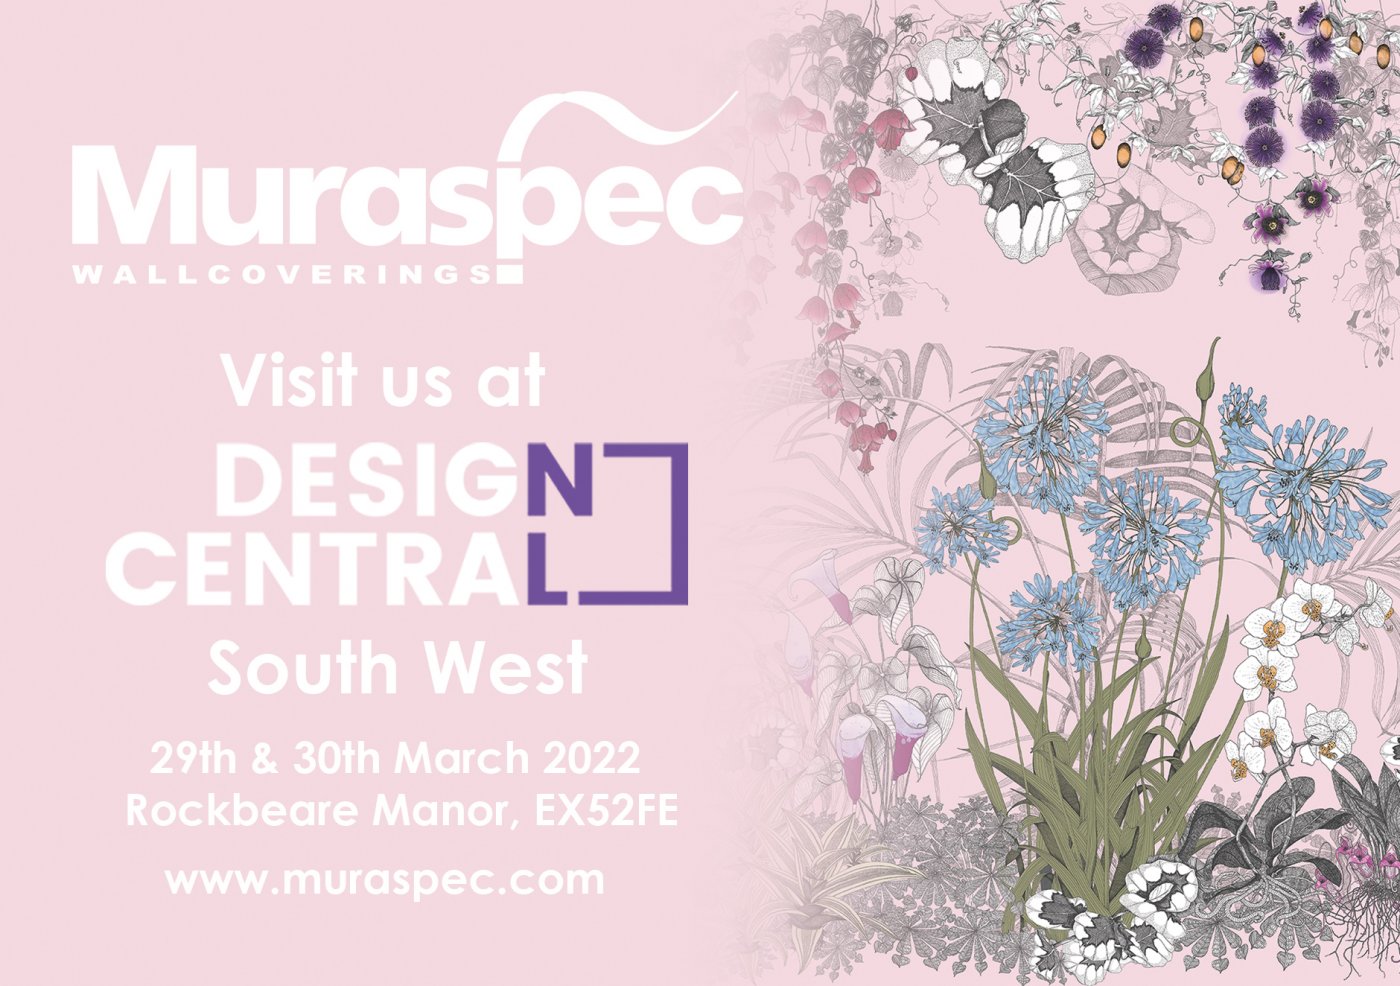 Meet us at Design Central South West